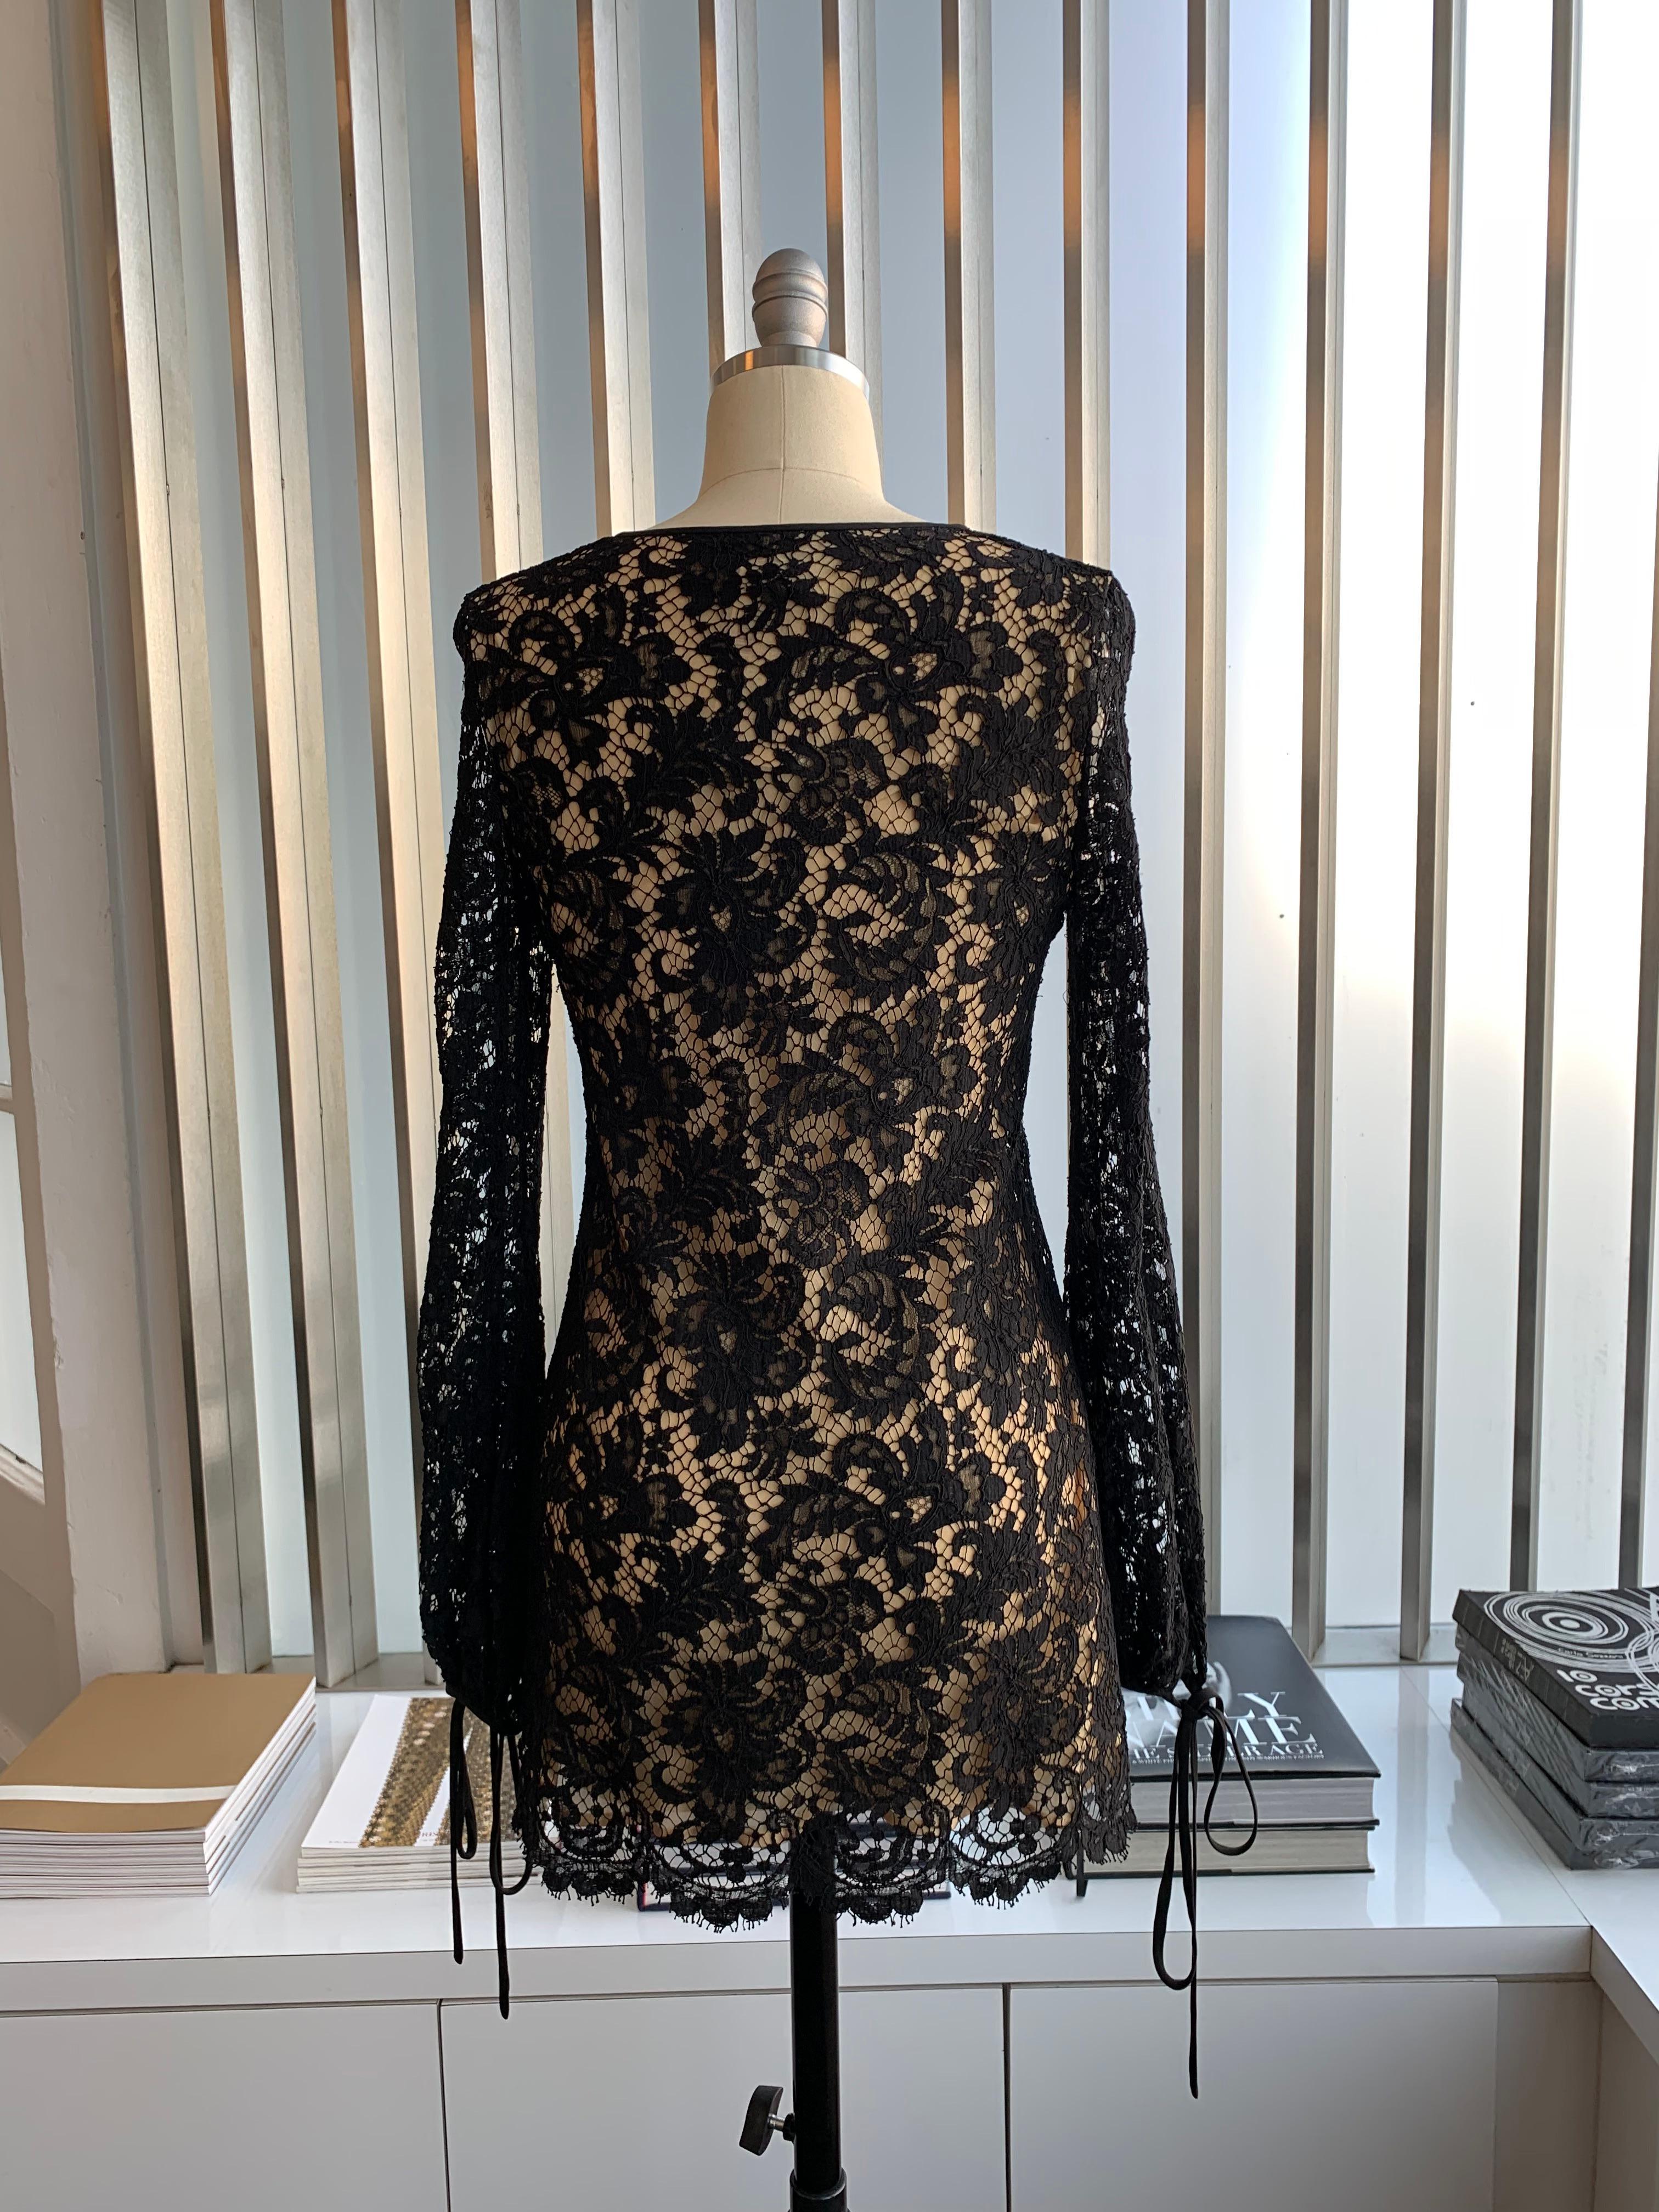 Women's Stunning Gucci By Tom Ford 1996 Black Lace Mini Dress with Original Tags 